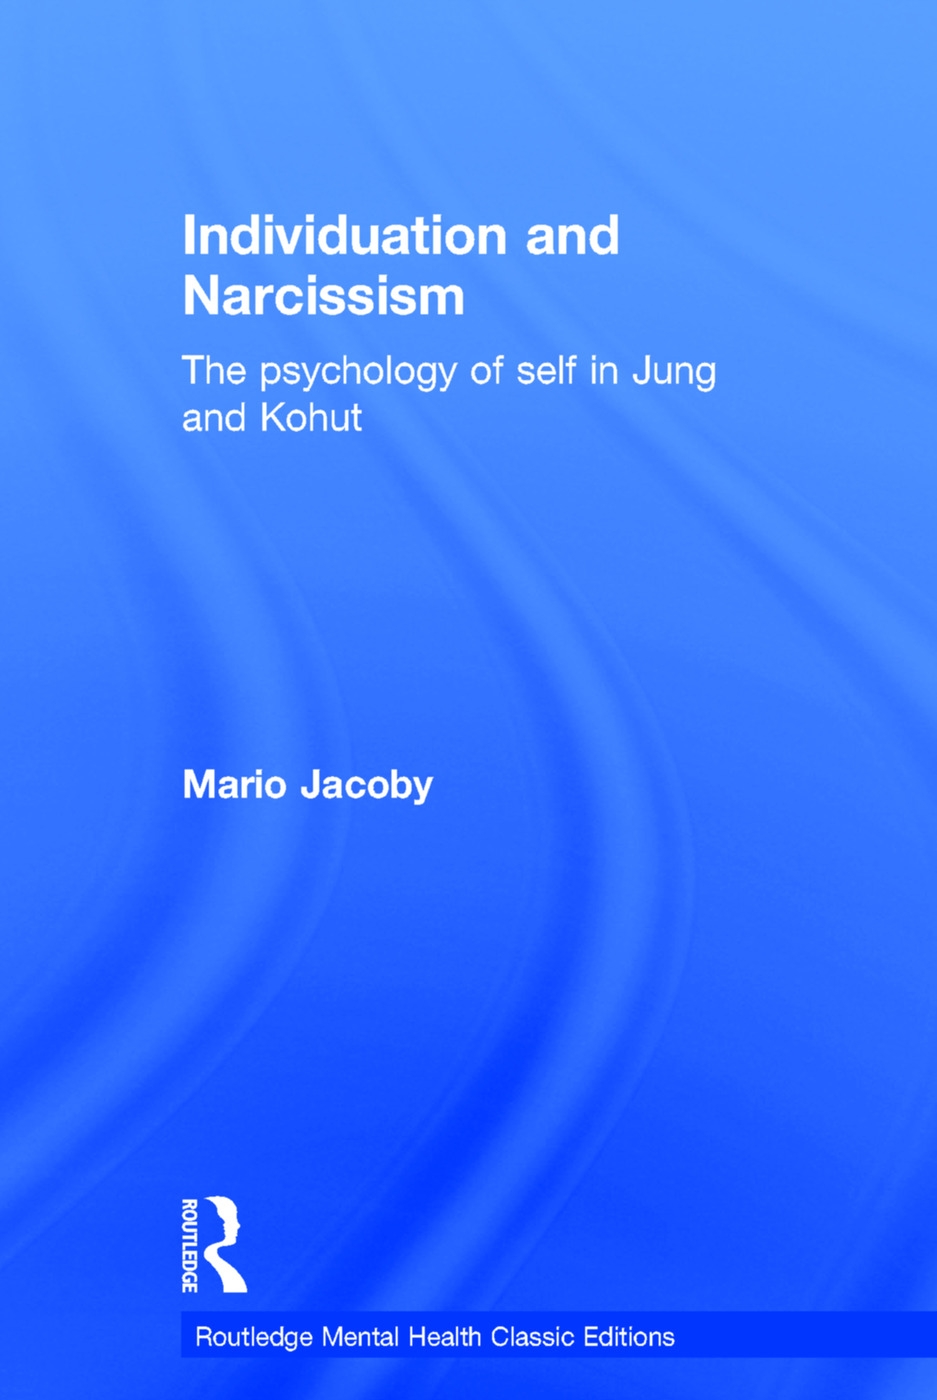 Individuation and Narcissism: The Psychology of Self in Jung and Kohut